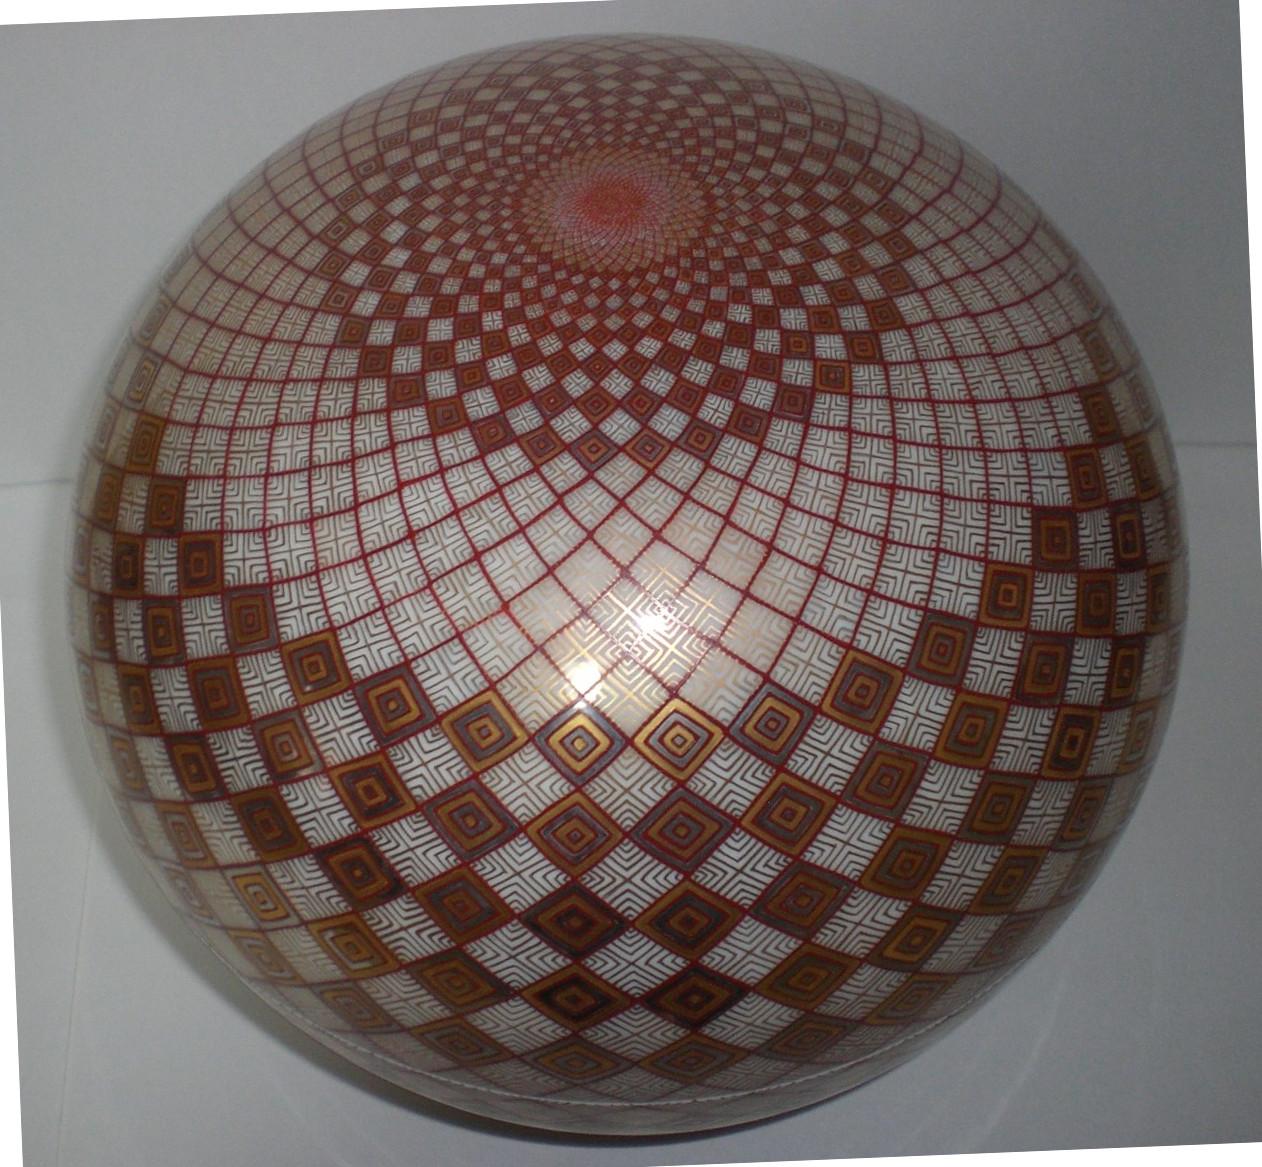 Unique extraordinary Japanese contemporary Imari decorative porcelain box, extremely intricately platinum and gold gilded and hand-painted on an exquisite ovoid shape body, featuring an extremely intricate geometric progression expressed in red,